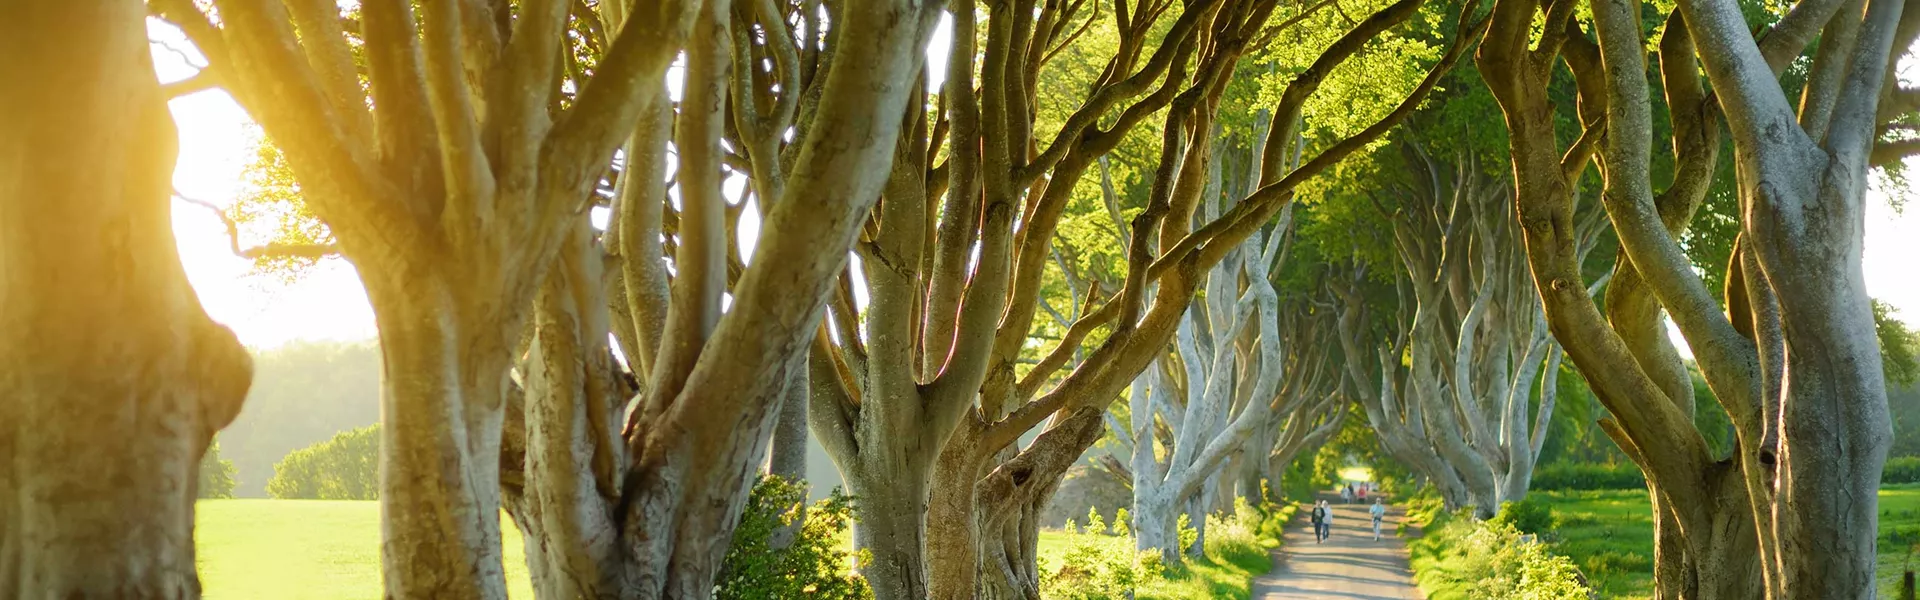 Alloy in nature with trees on the sides in County Antrim, Northern Ireland